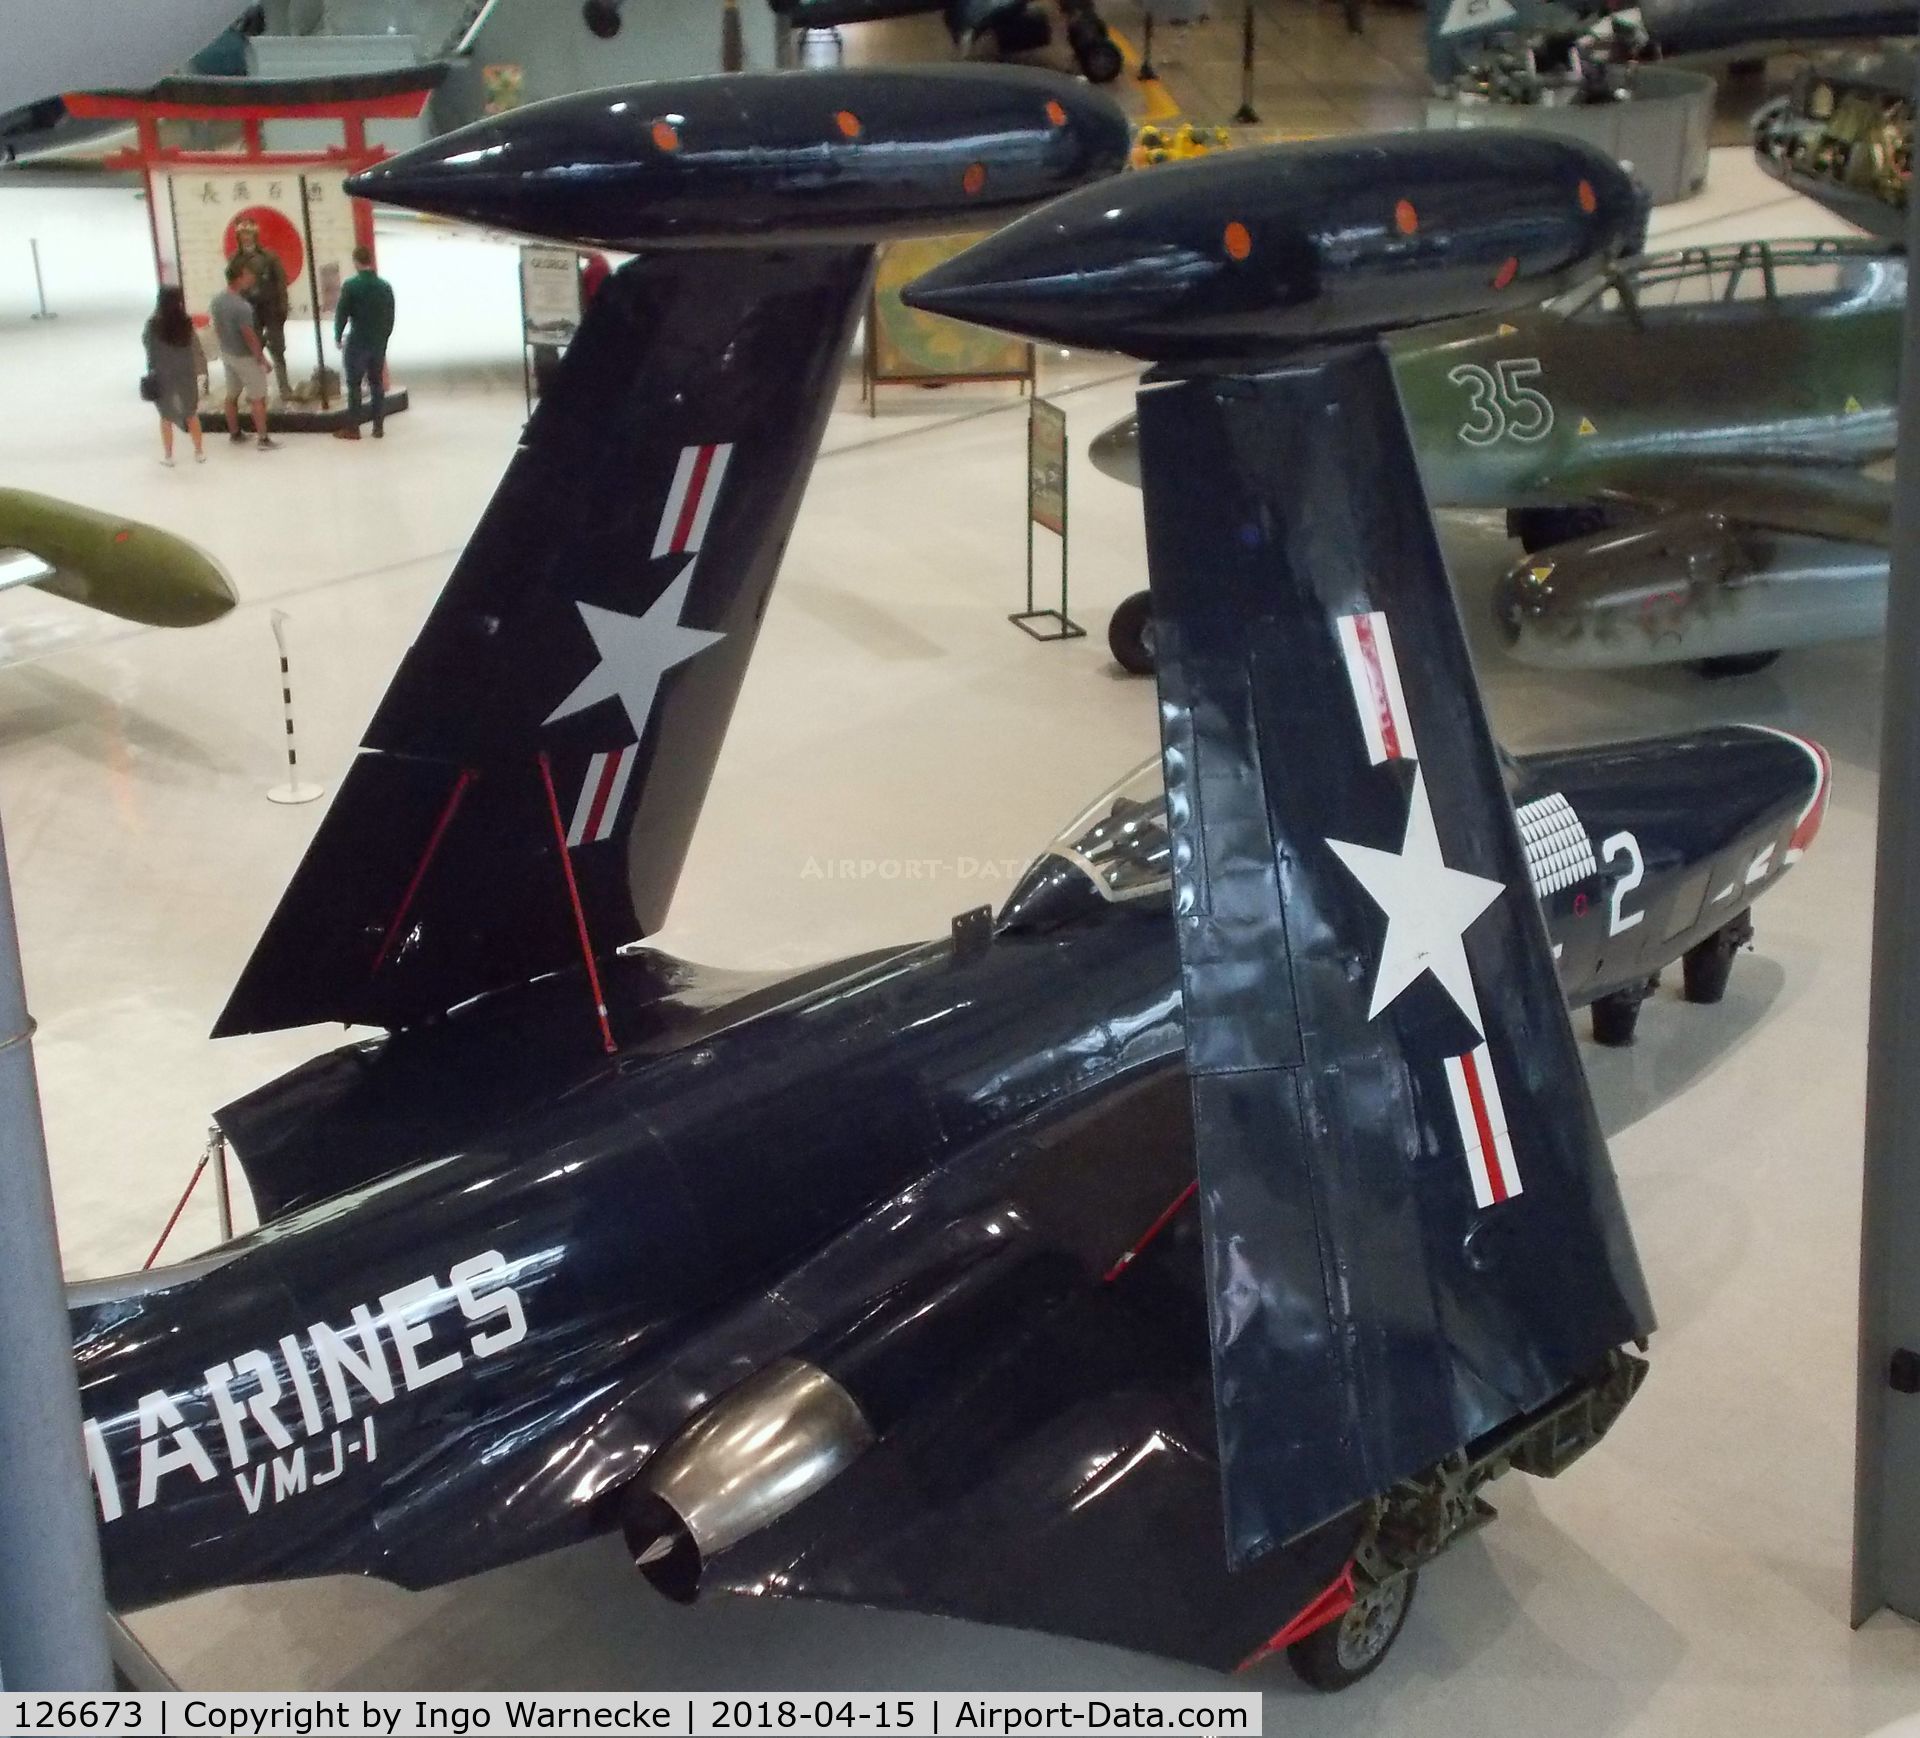 126673, McDonnell F2H-2P Banshee C/N Not found 126673, McDonnell F2H-2P Banshee at the NMNA, Pensacola FL